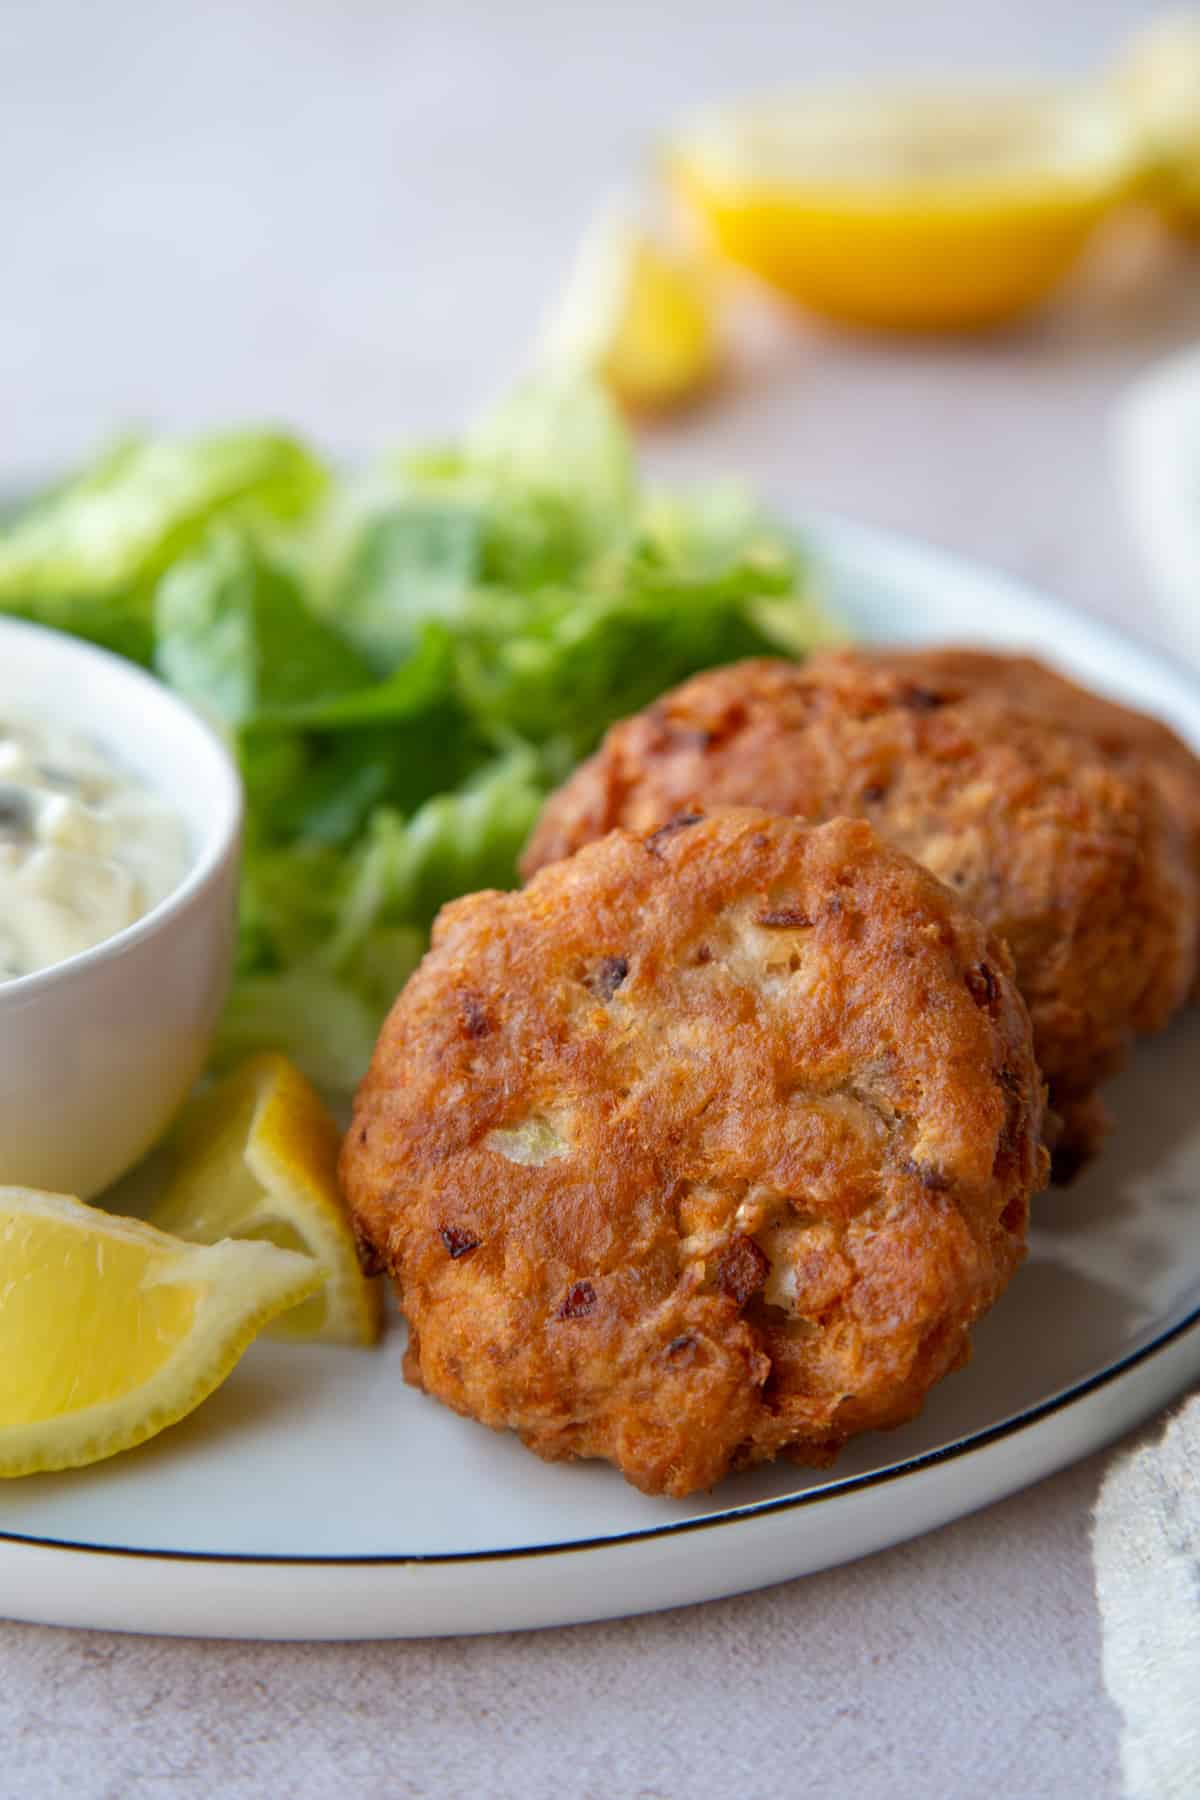 2 fried Salmon Patties on a dinner plate next to Tartar Sauce and lemon wedges.